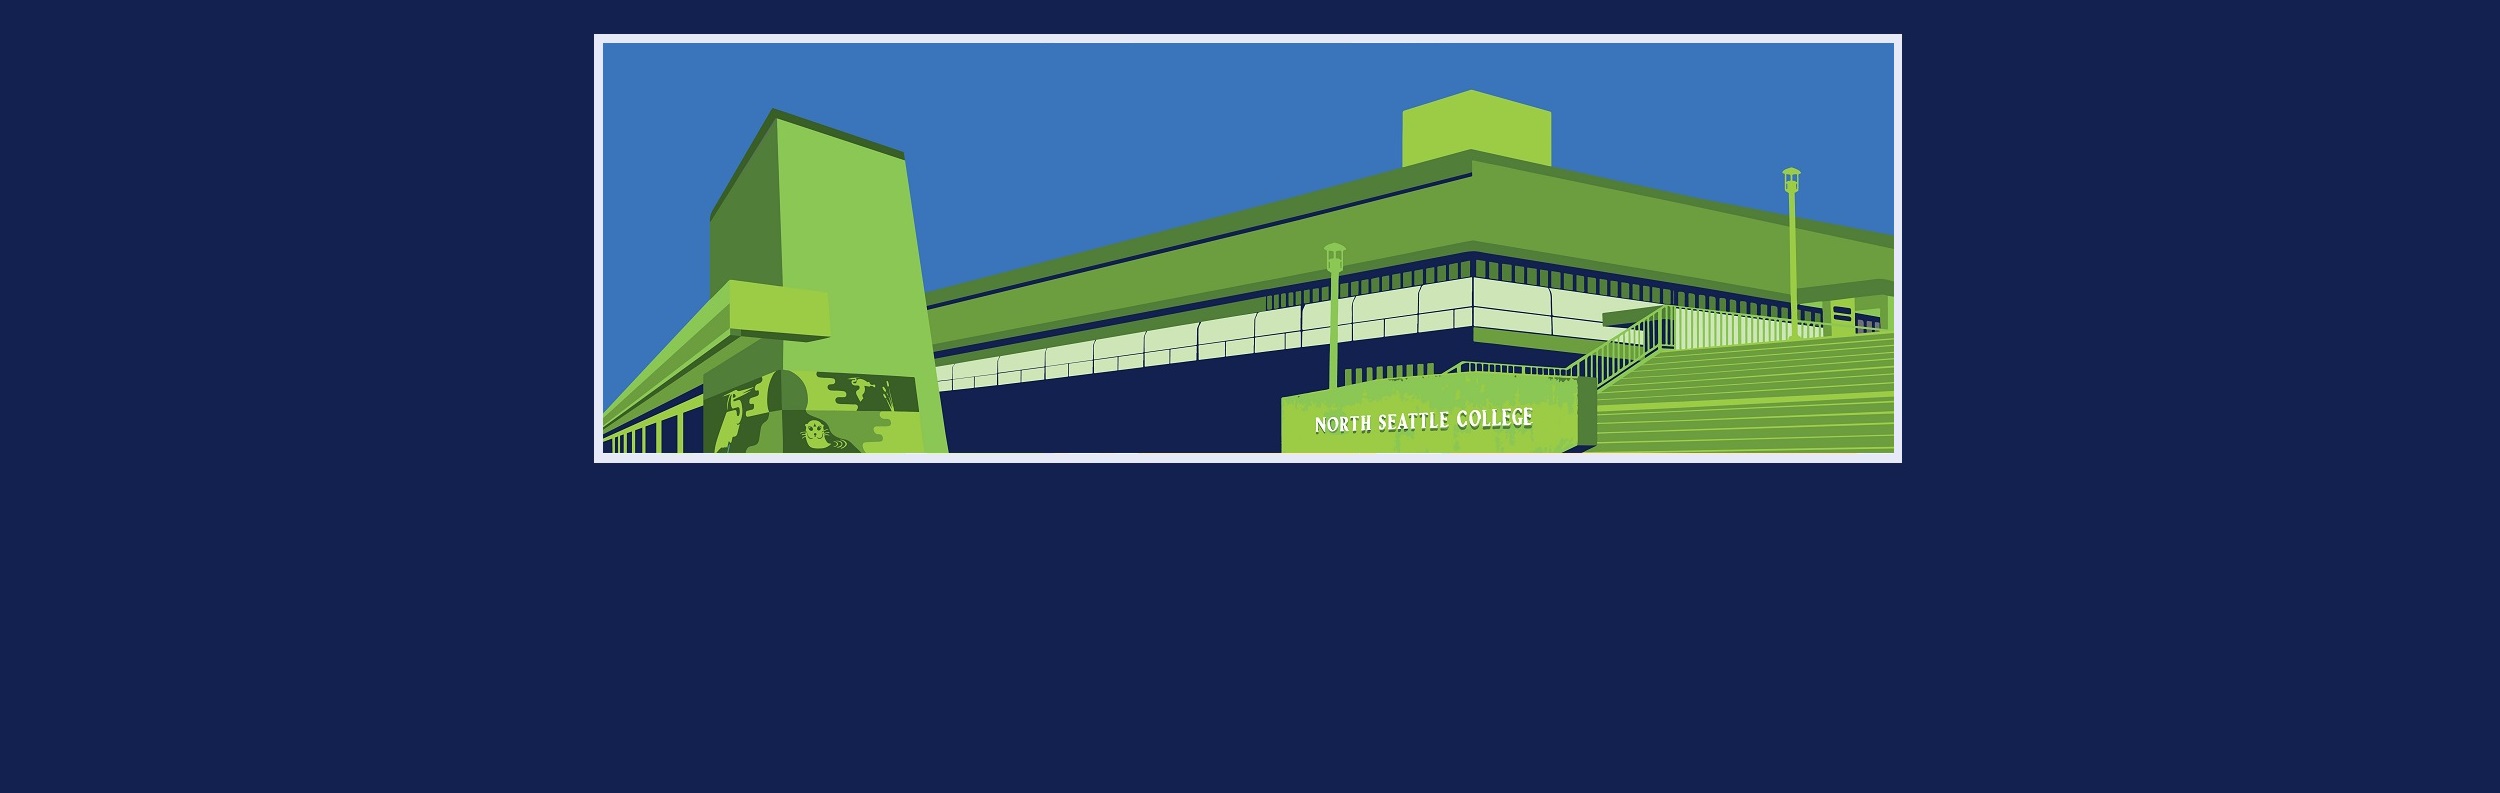  Stylized image of North Seattle College buildings 